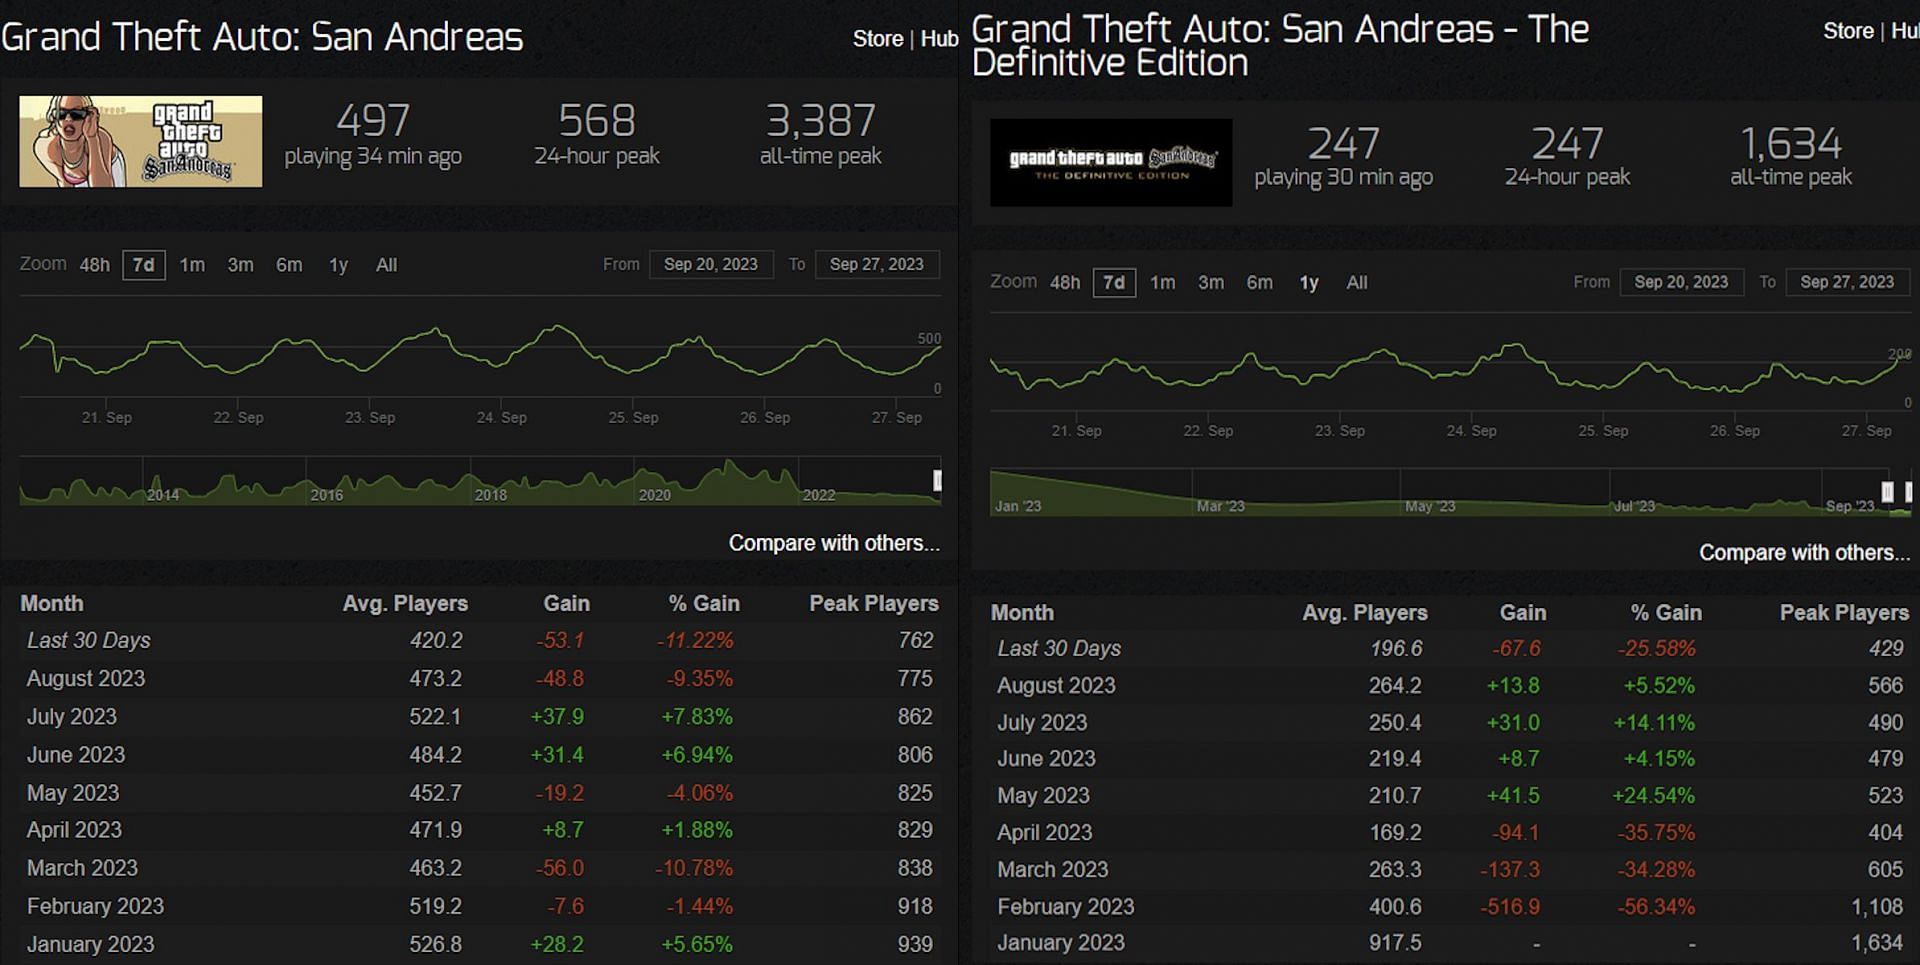 Grand Theft Auto: San Andreas is definitely more popular than its remaster (Image via Steam Charts)